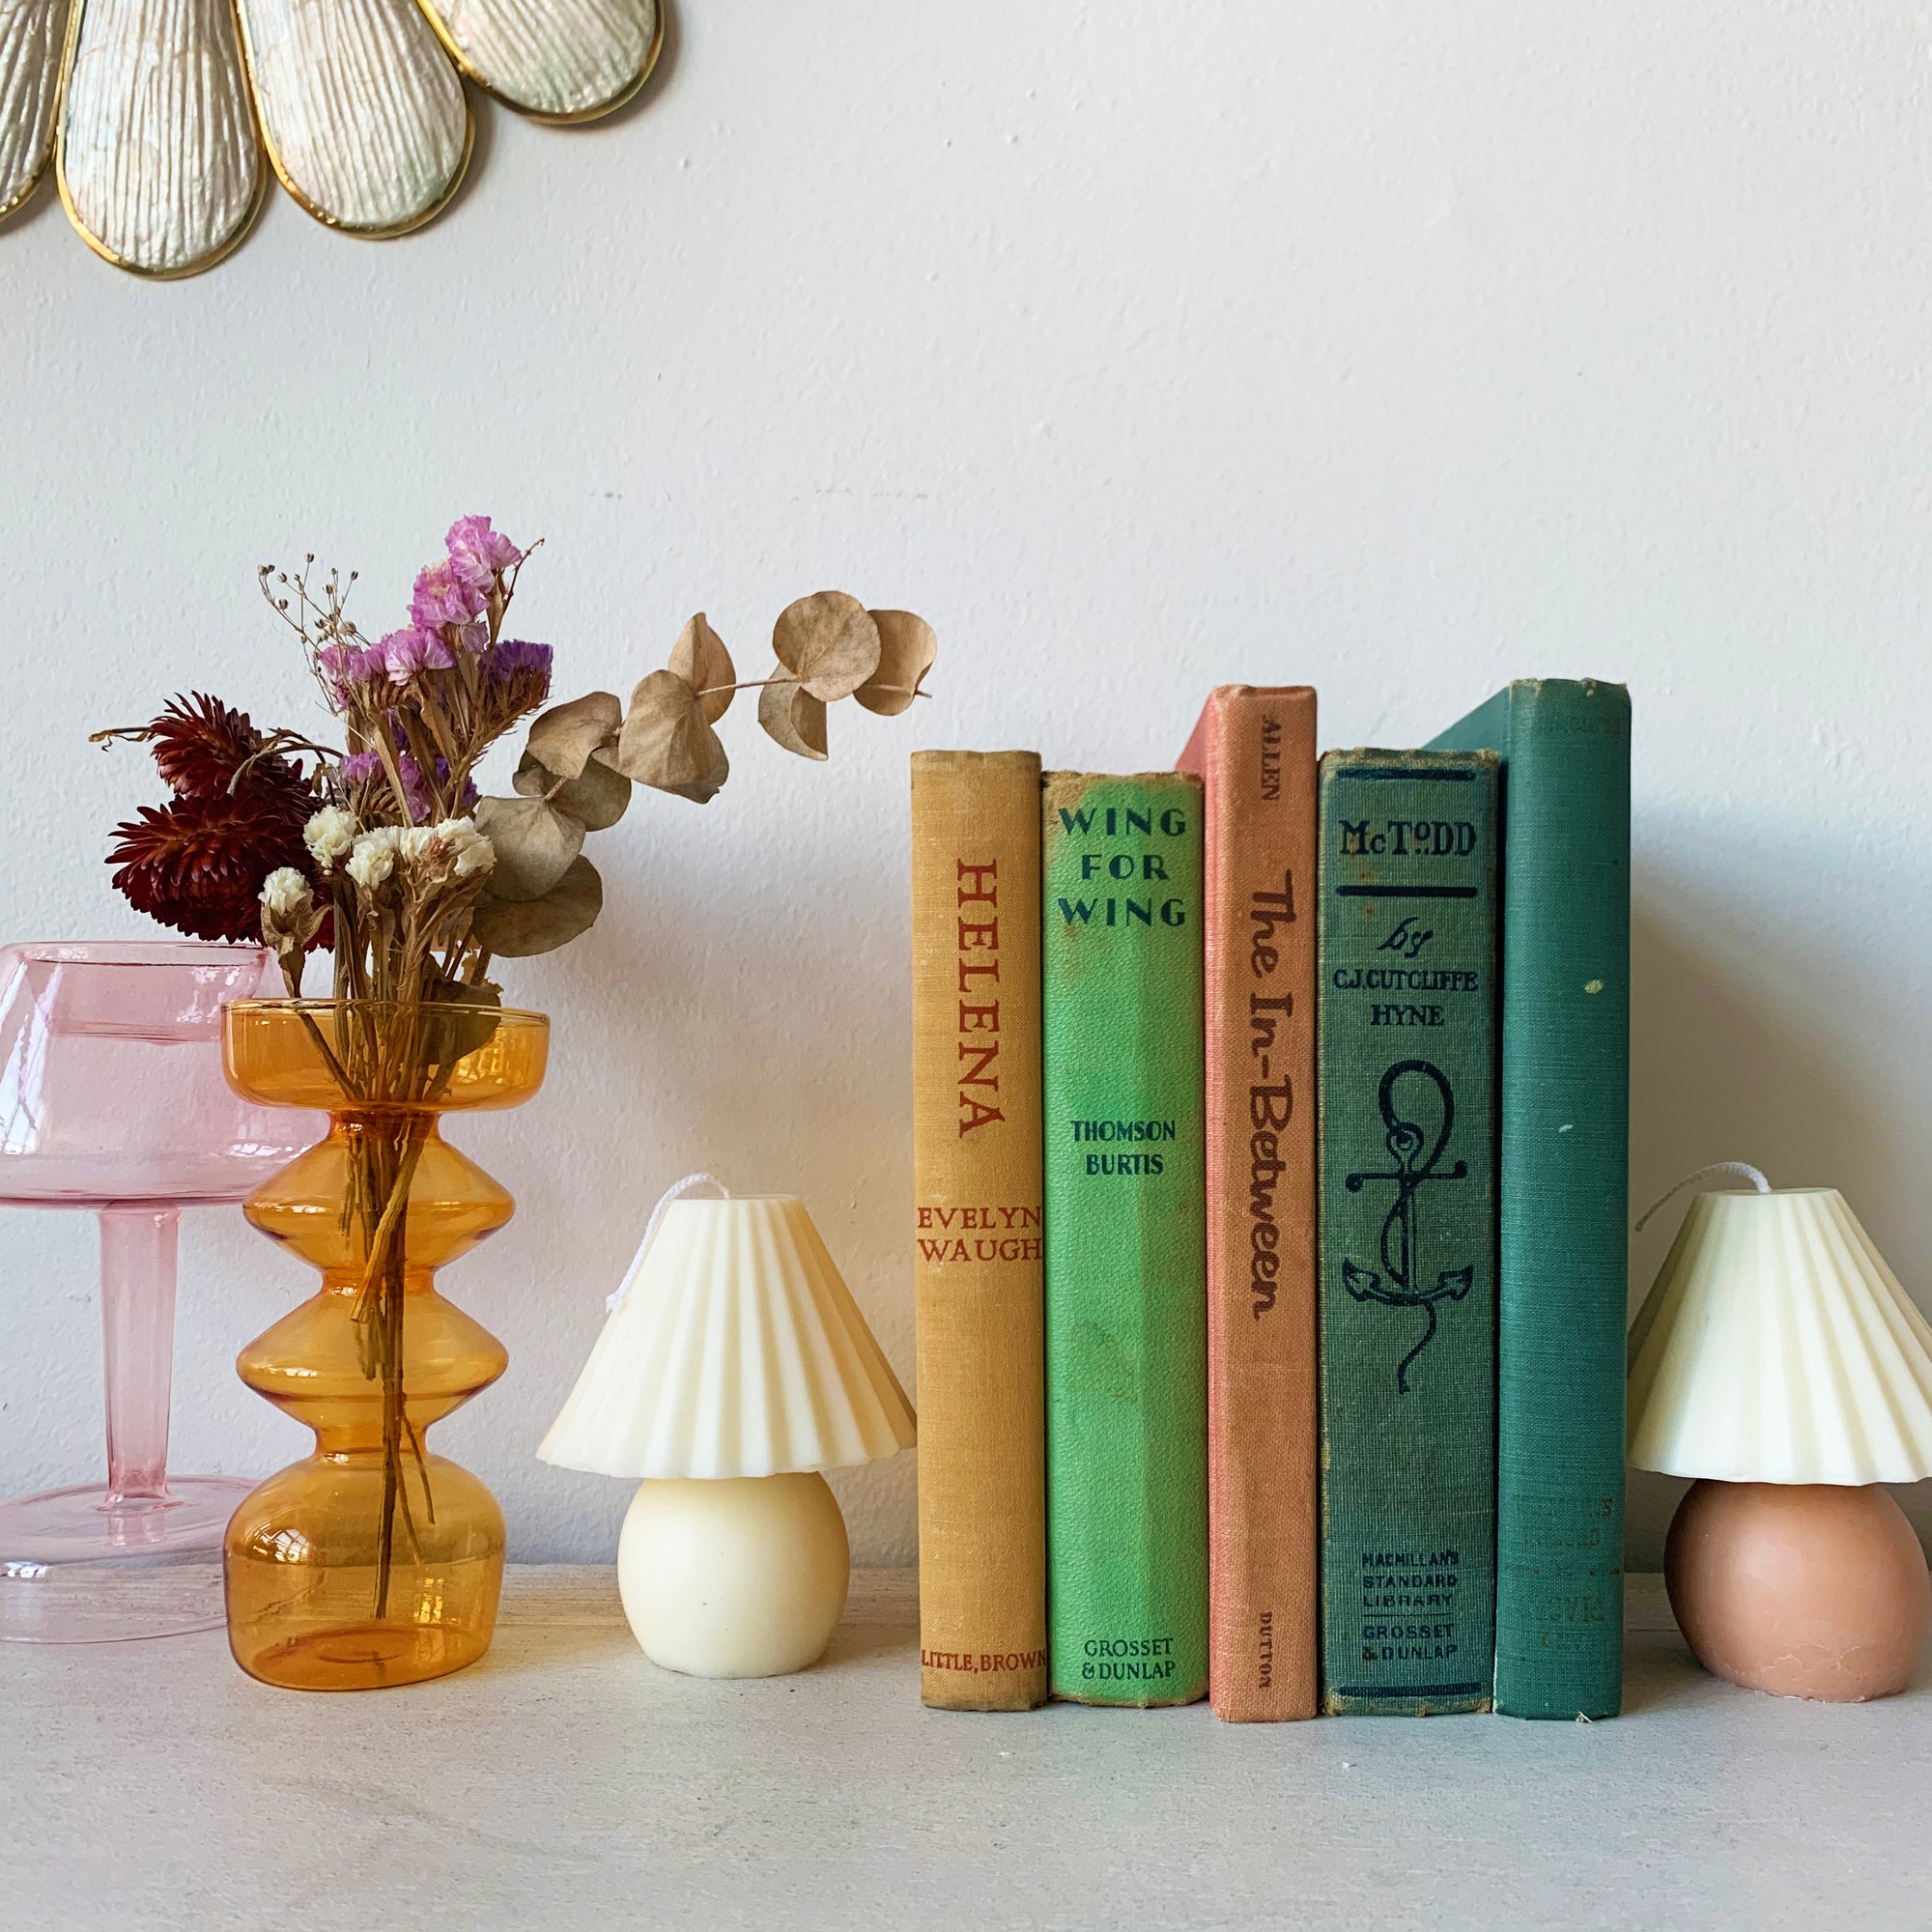 【Ready to ship】Lamp Shaped Soy & BeesWax Candle